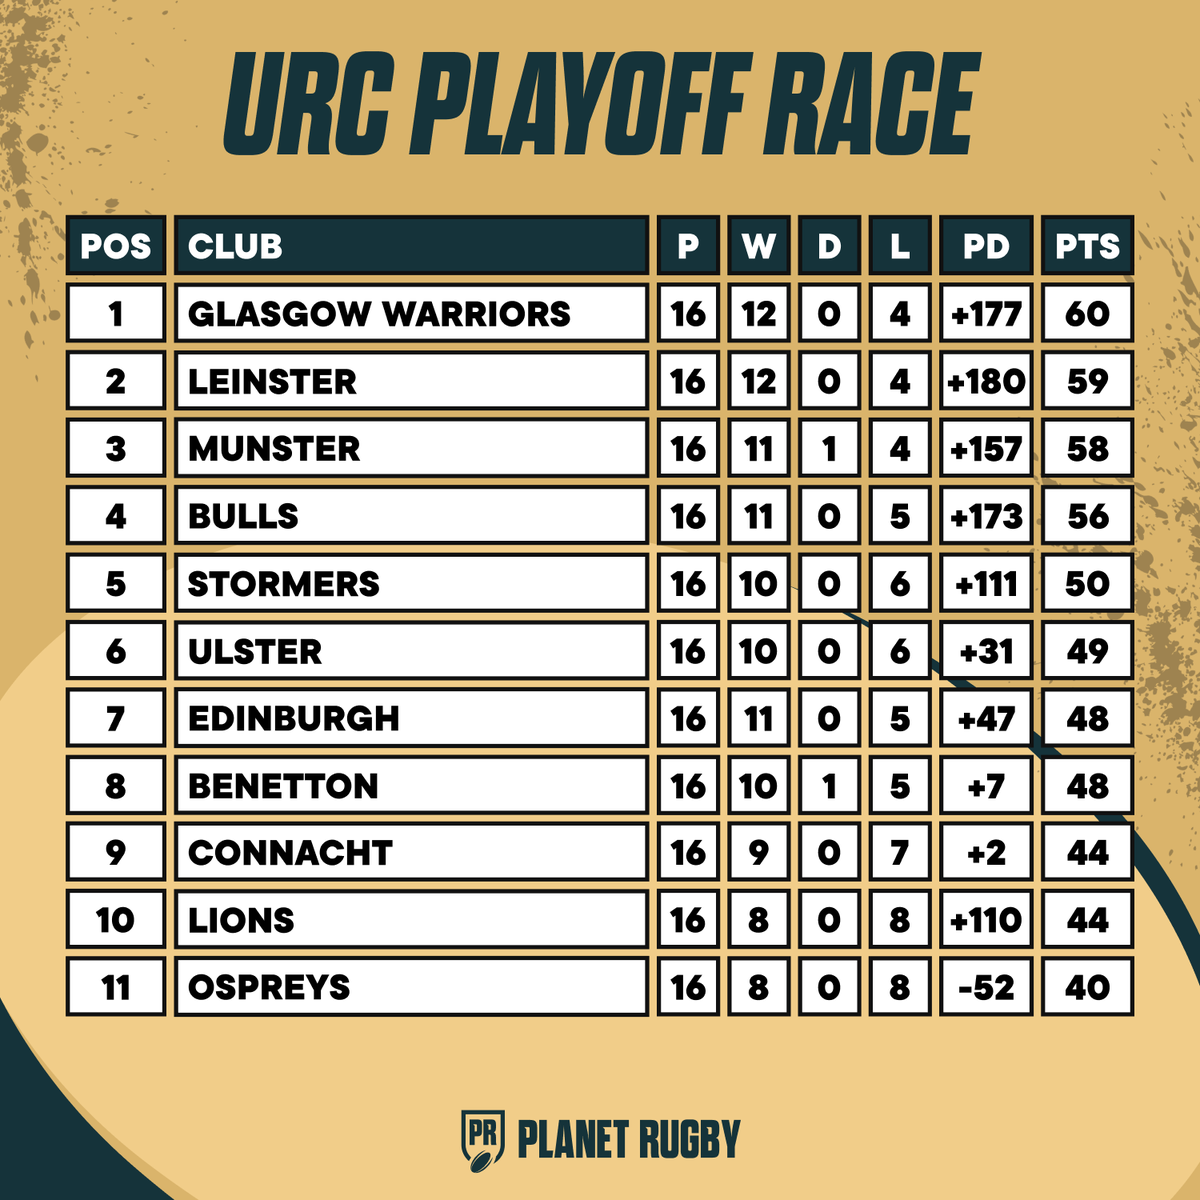 📋 It is as tight as ever in the #URC's #RaceToTheEight with just two rounds remaining. 

👇 Check out the full playoff picture in the story below!